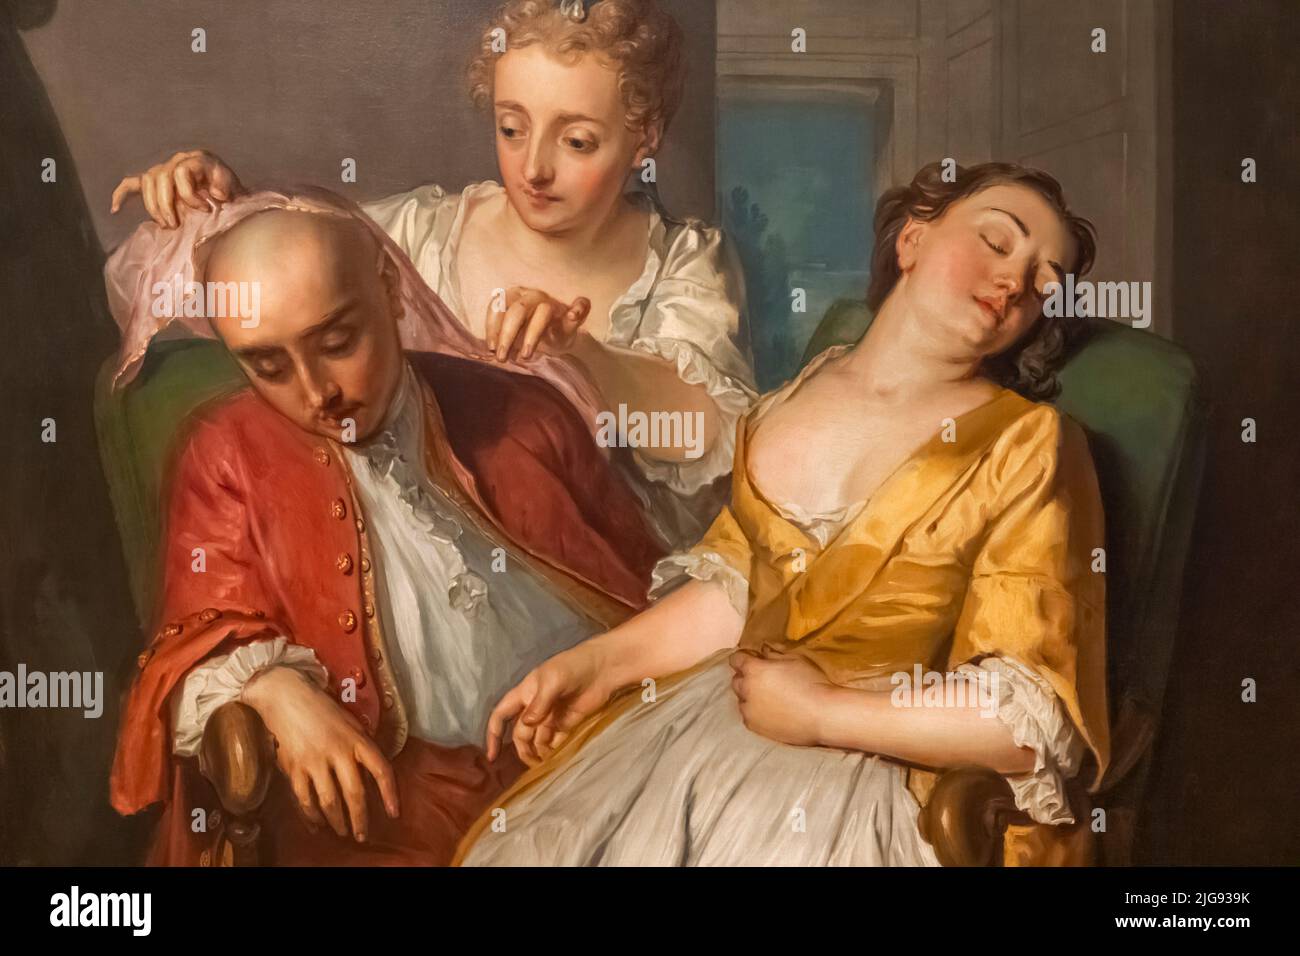 Painting titled 'A Scene from The Careless Husband' by German Artist Philip Mercier dated 1738 Stock Photo